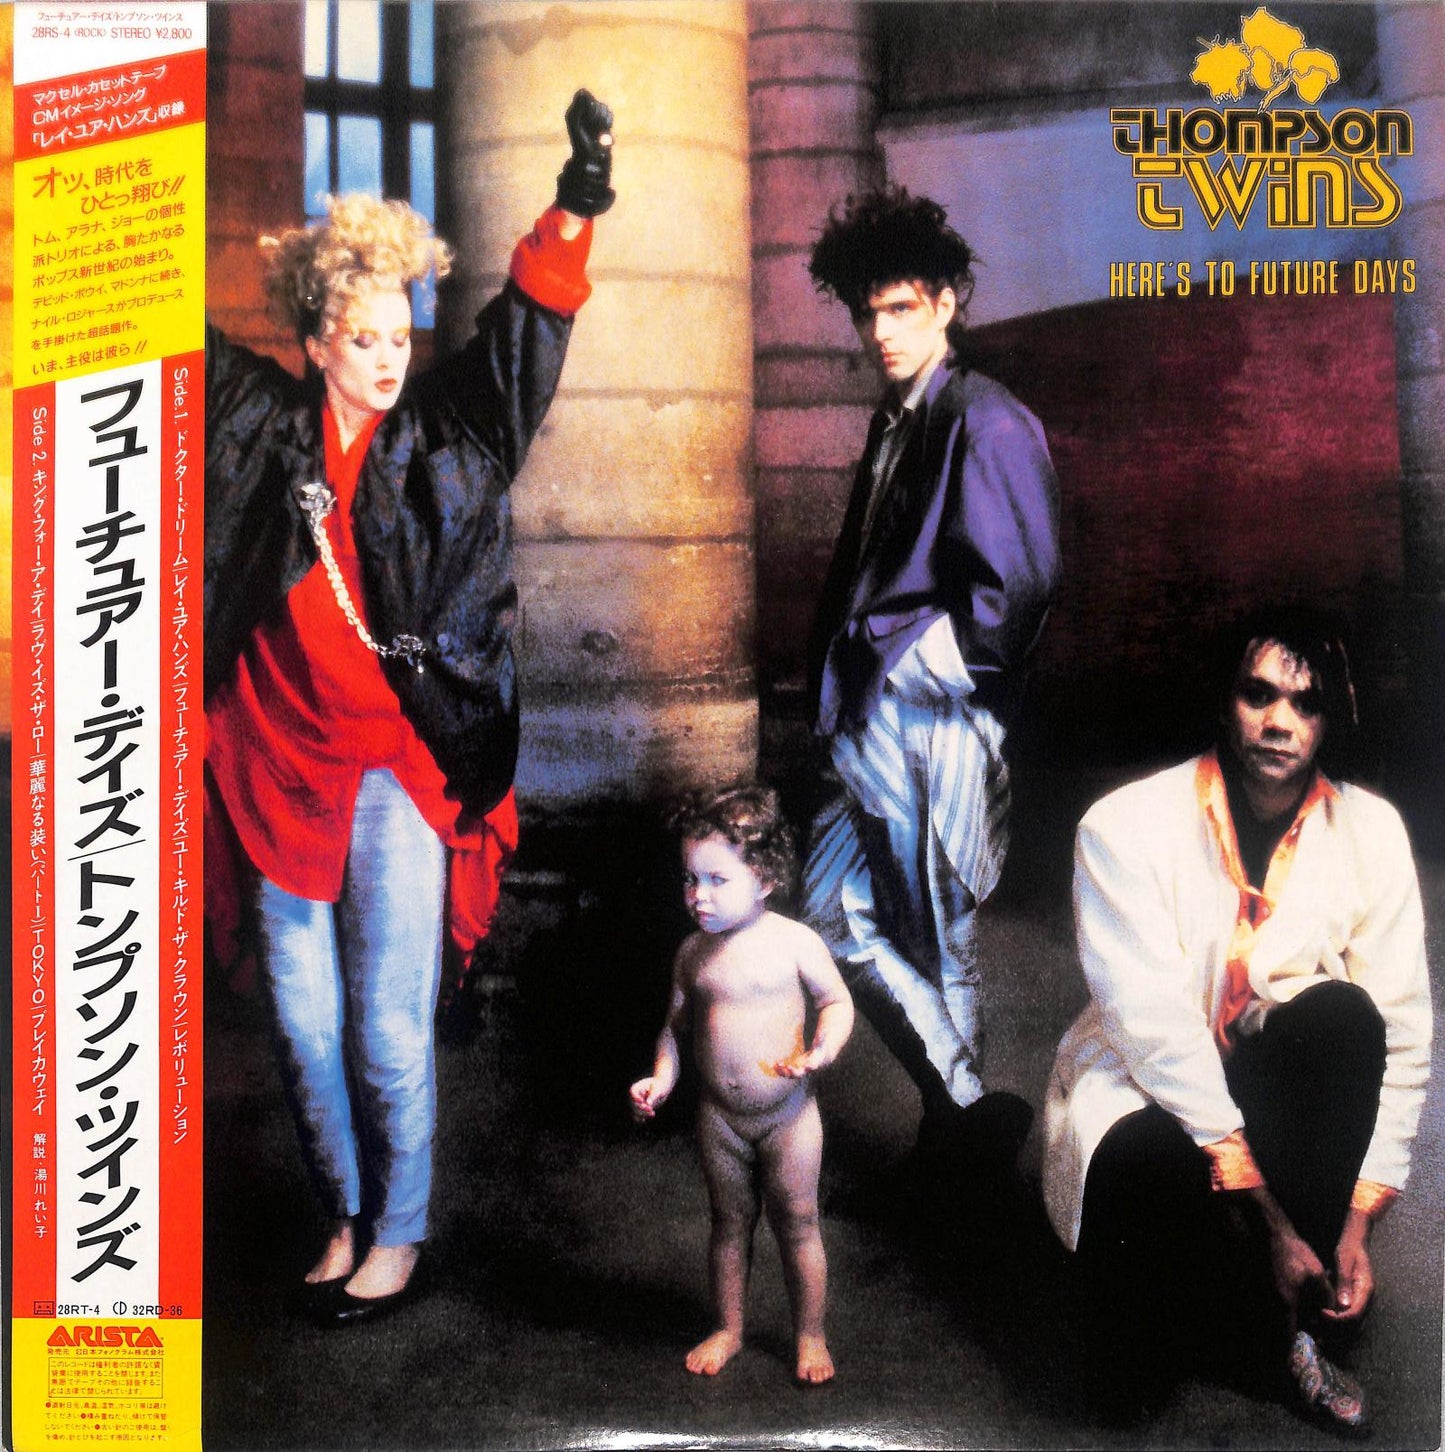 THOMPSON TWINS - Here's To Future Days